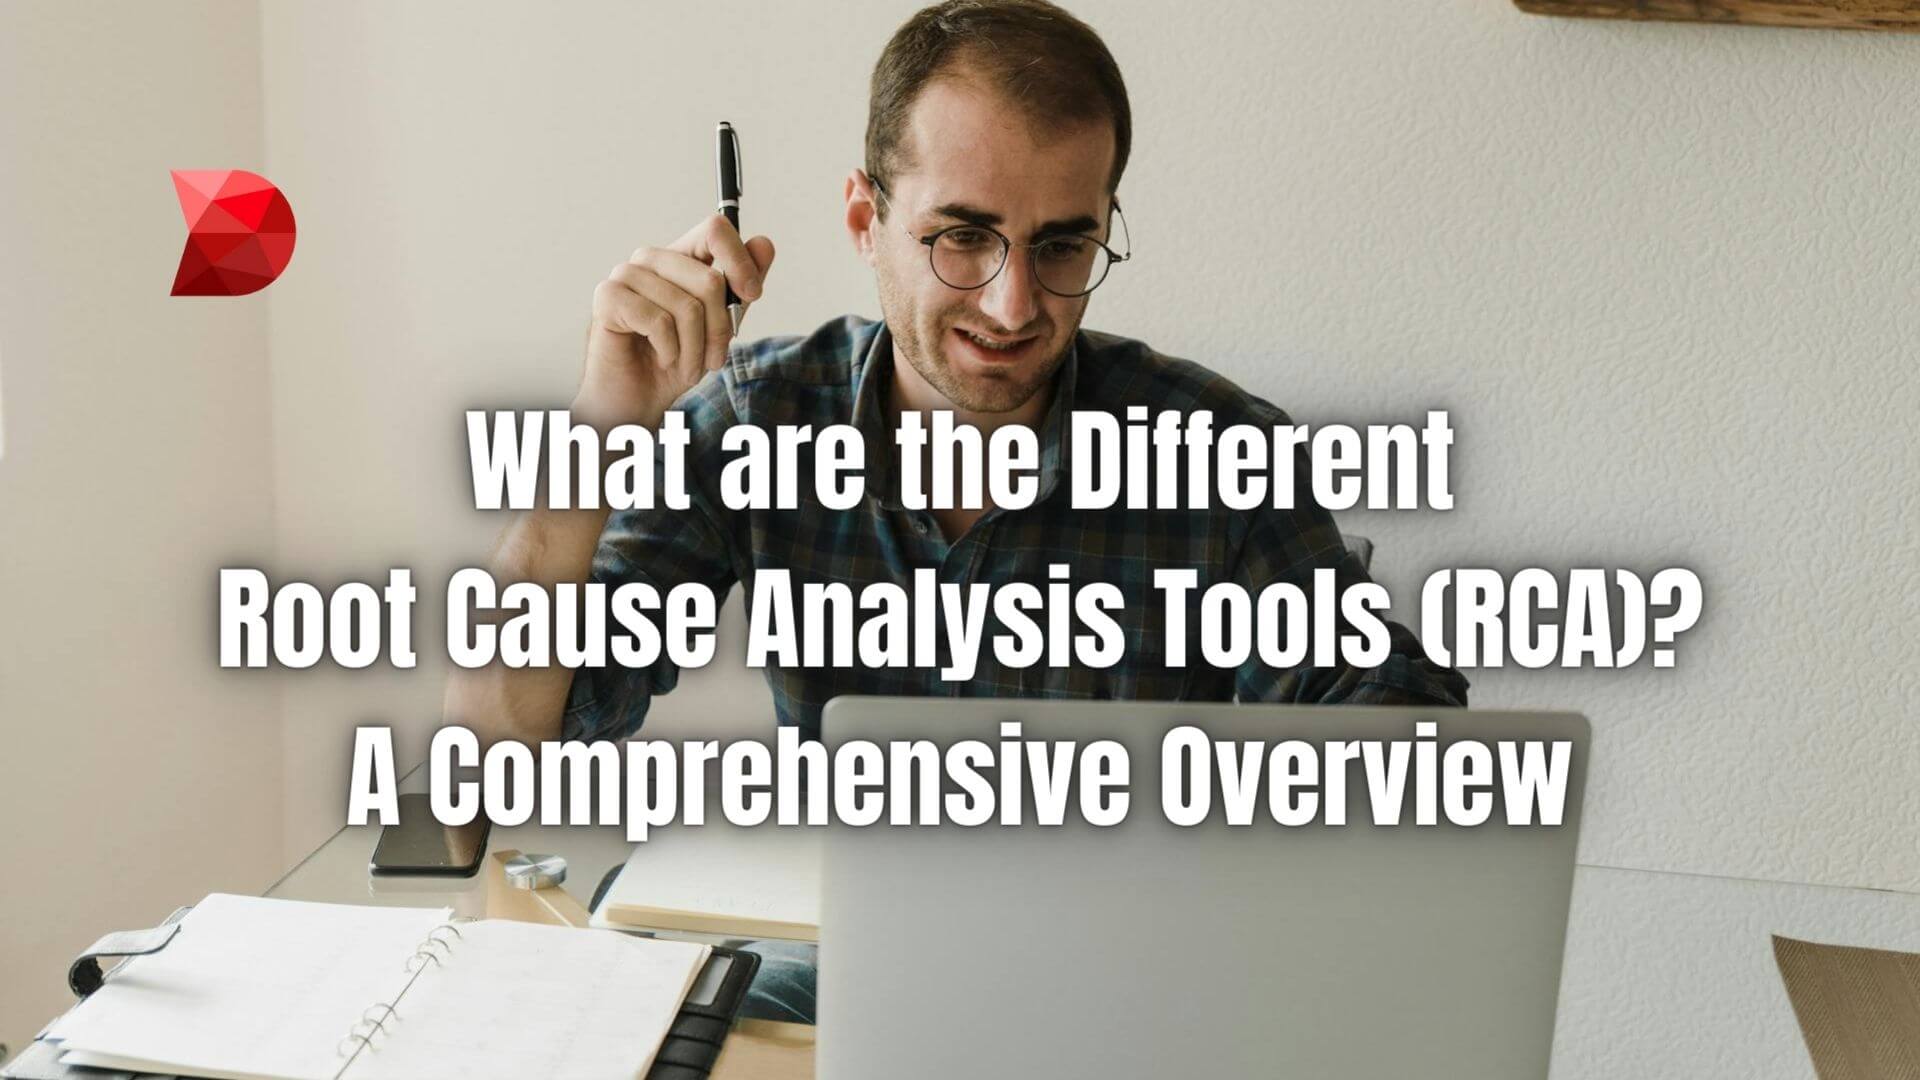 Discover the essential Root Cause Analysis Tools (RCA) in our guide. Click here to learn how to identify and address issues efficiently.